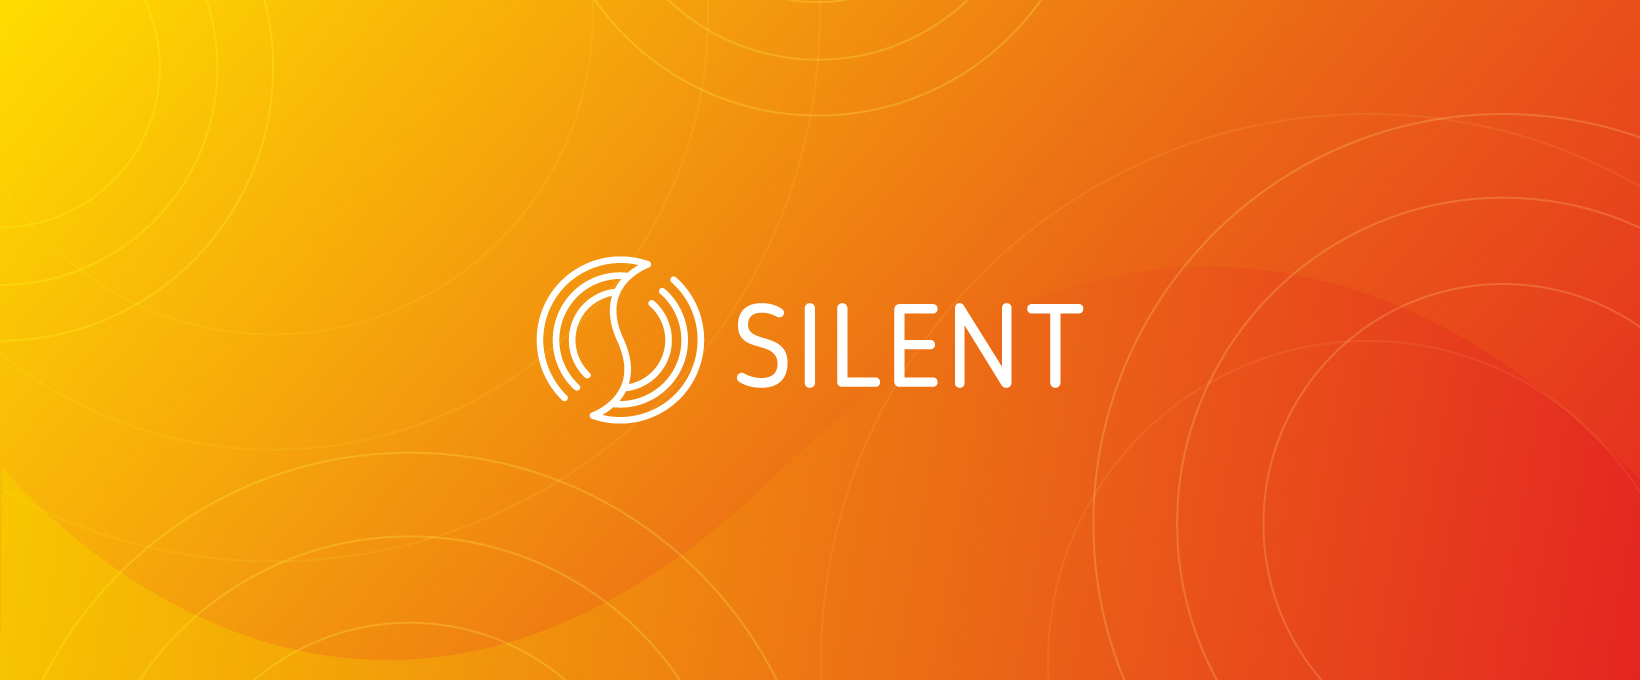 silent | silent ICO | silent power projects ltd